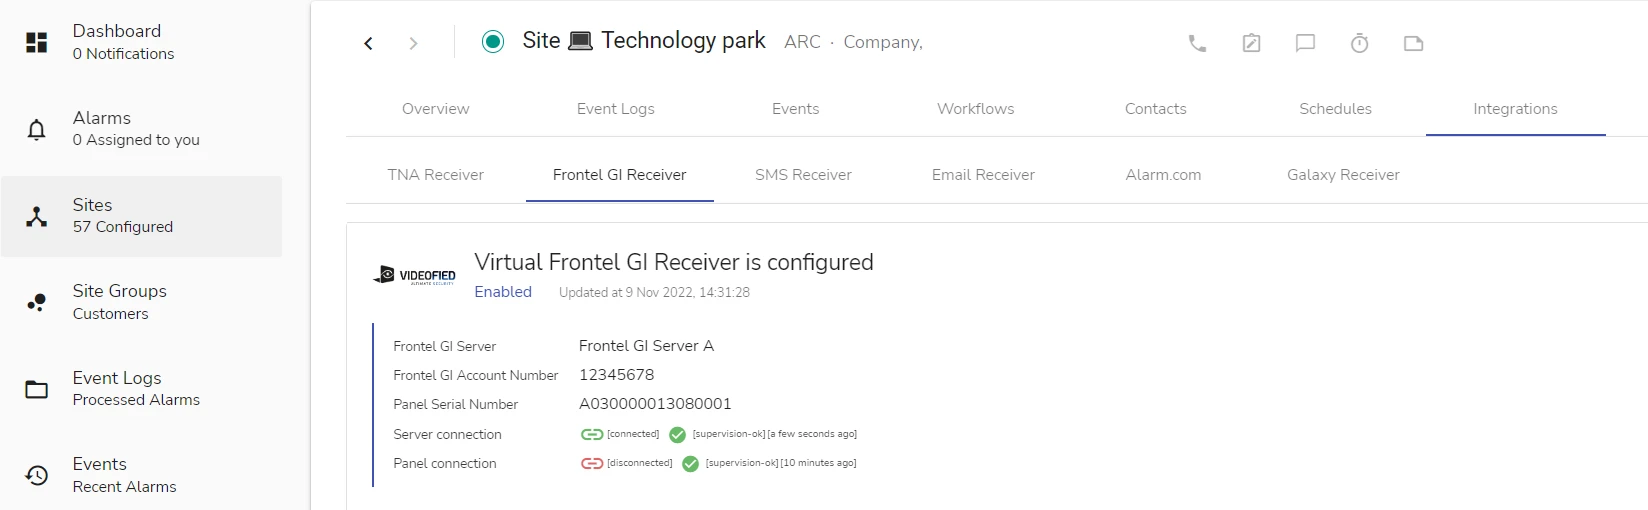 A Virtual Frontel GI Receiver instance when panel is not transferring data